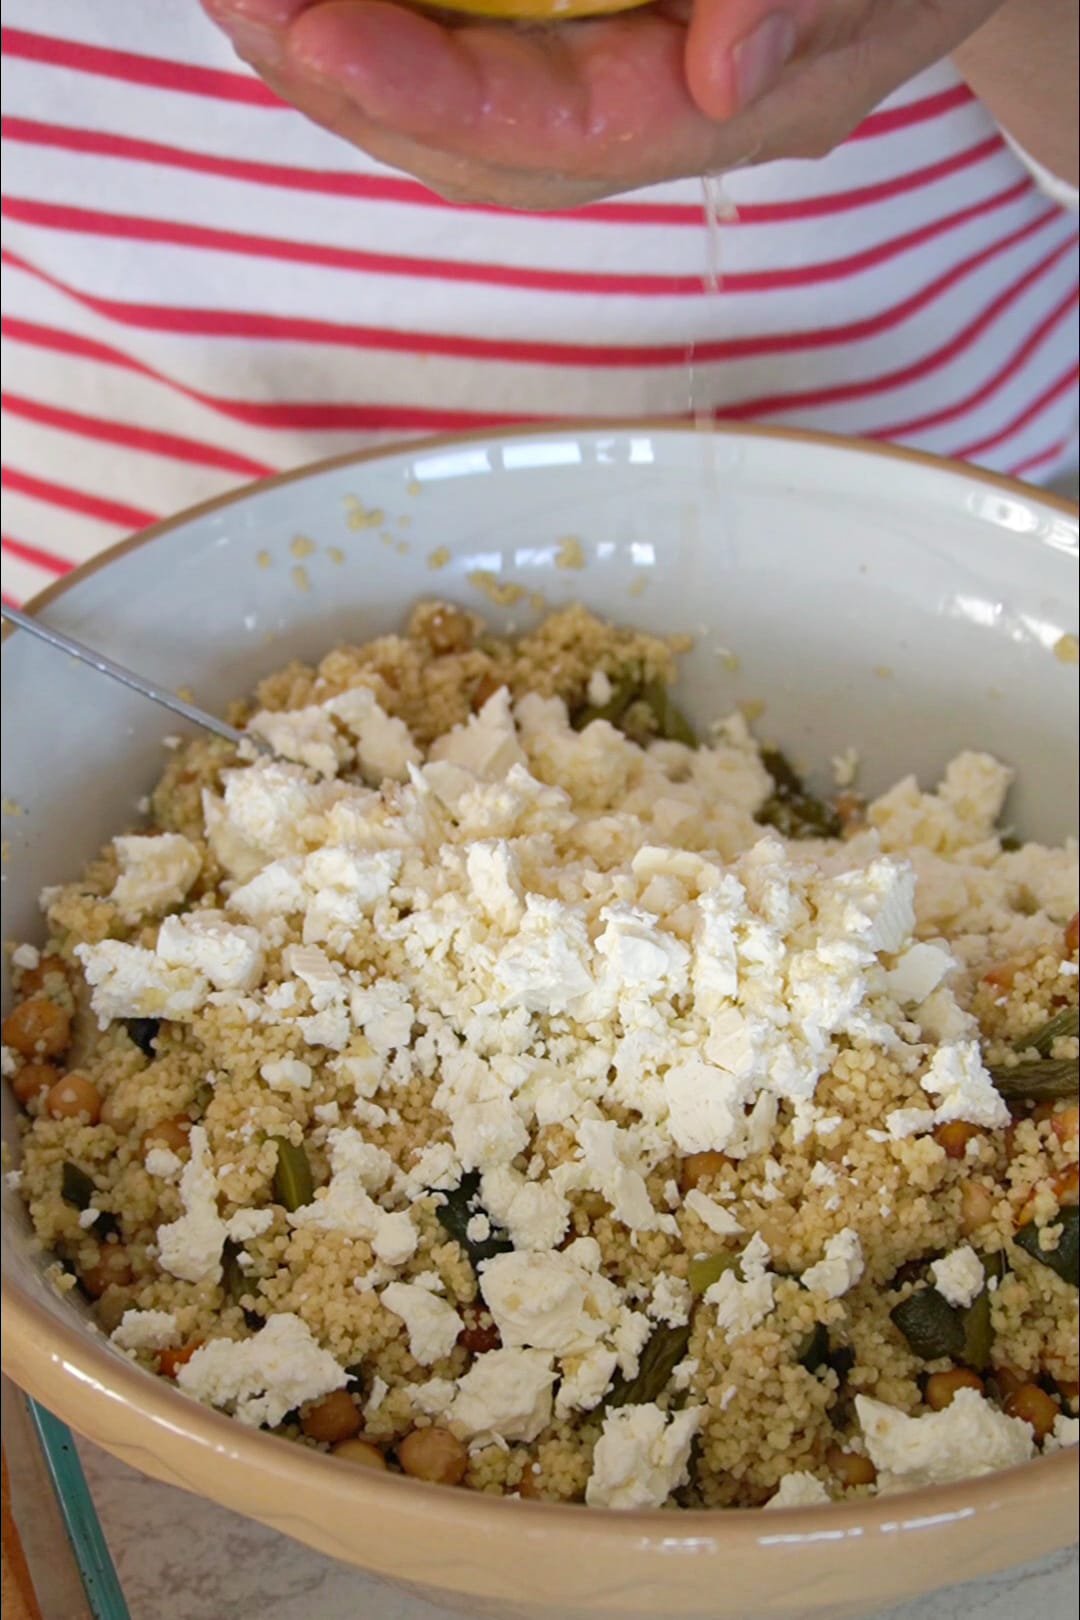 Roasted vegetables couscous salad topped with feta cheese